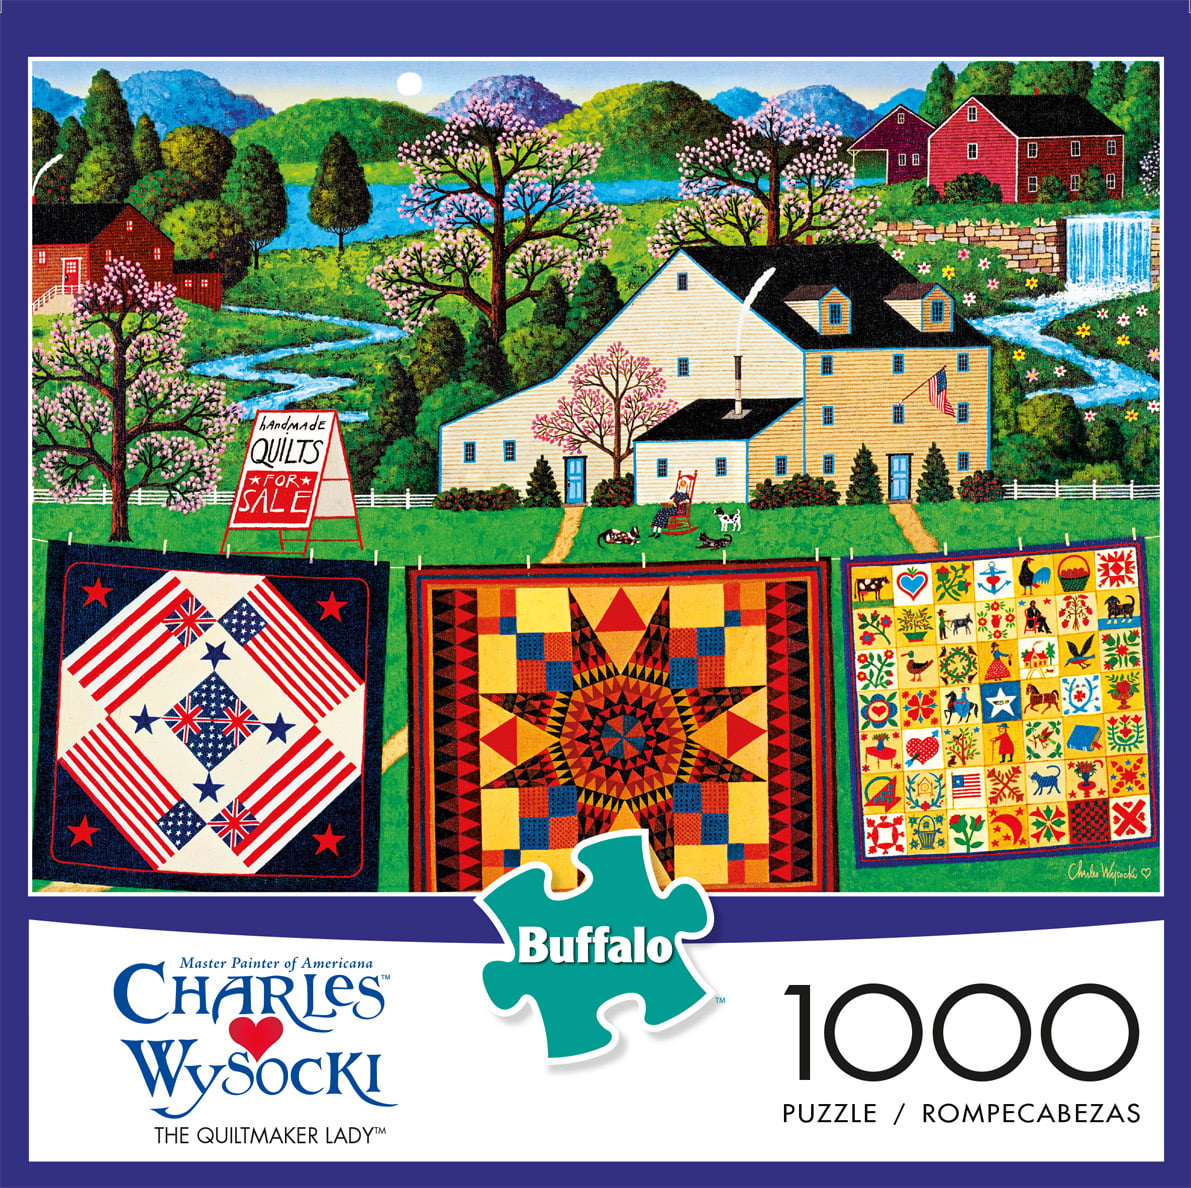 Charles Wysocki Supper Call 1000 Piece Puzzle Buffalo 26.75"×19.75" New 